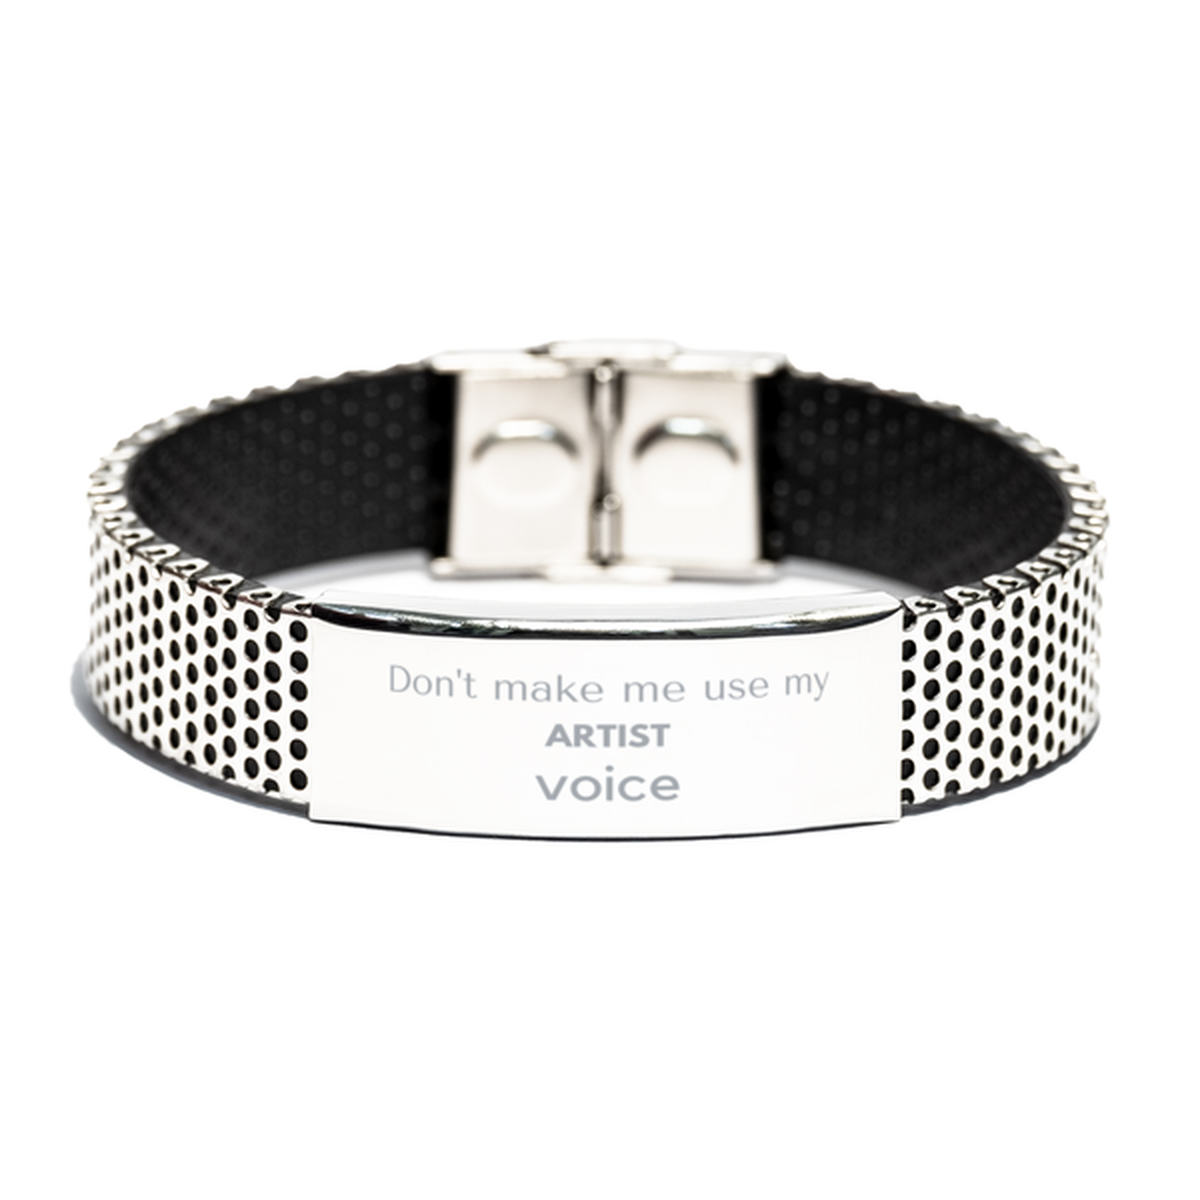 Don't make me use my Artist voice, Sarcasm Artist Gifts, Christmas Artist Stainless Steel Bracelet Birthday Unique Gifts For Artist Coworkers, Men, Women, Colleague, Friends